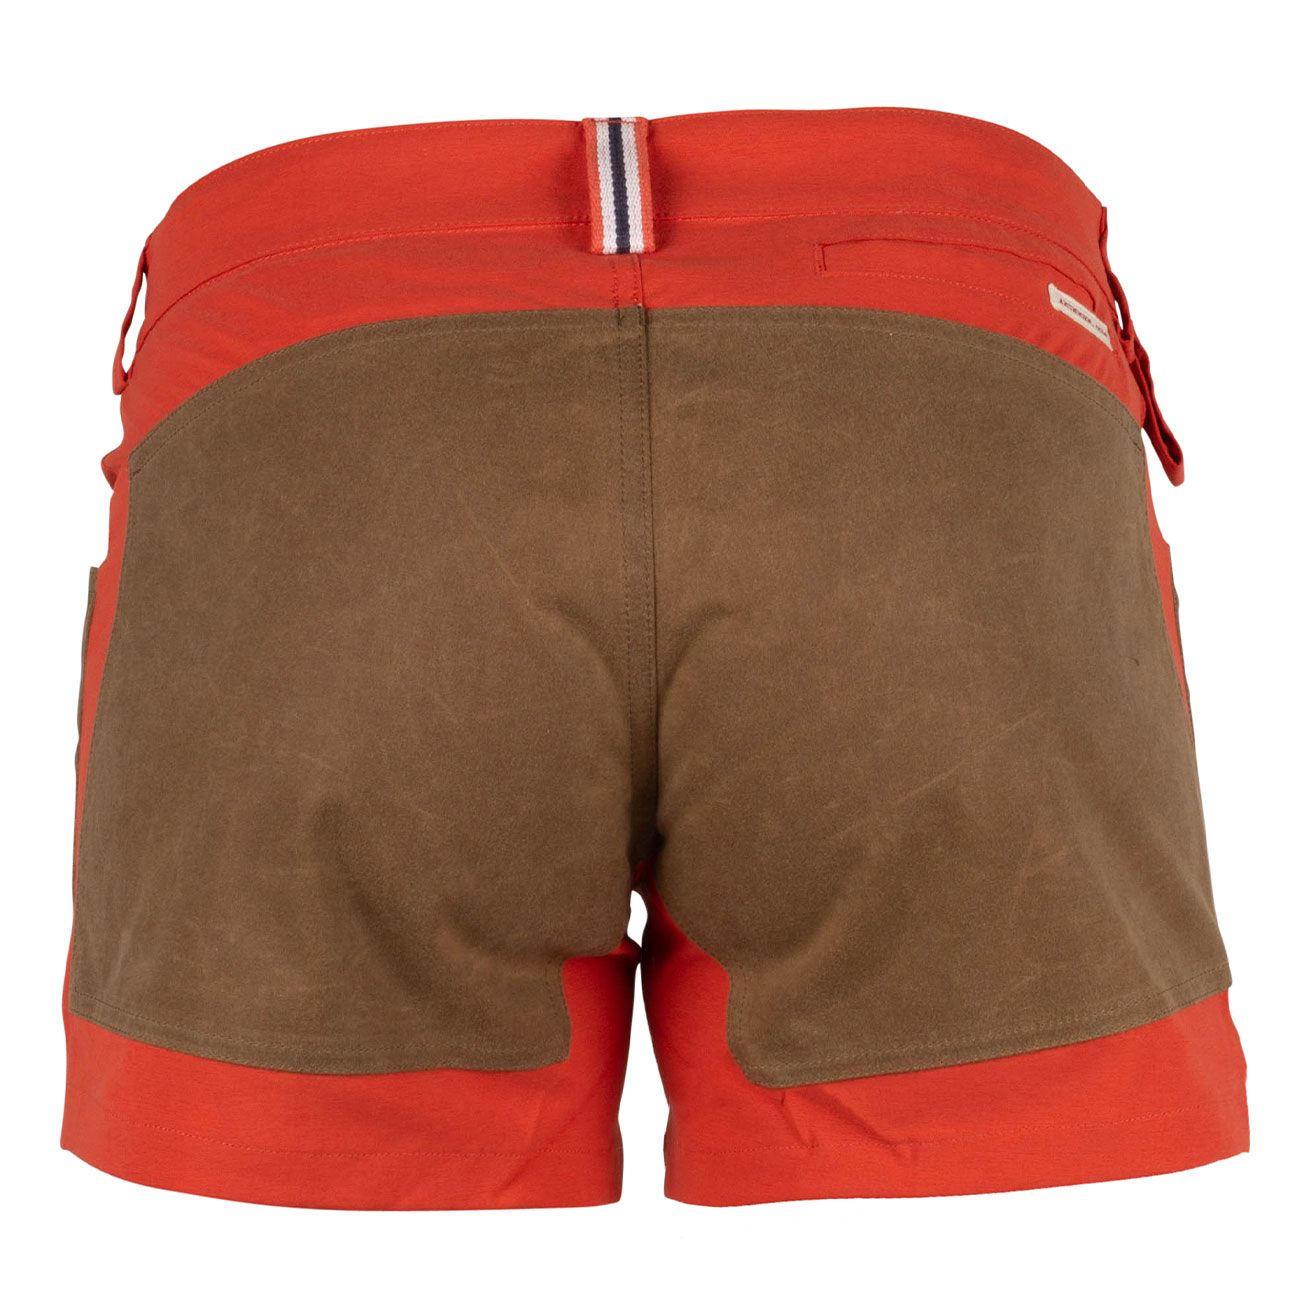 5 Incher Field Shorts Womens - Red Clay/Tan